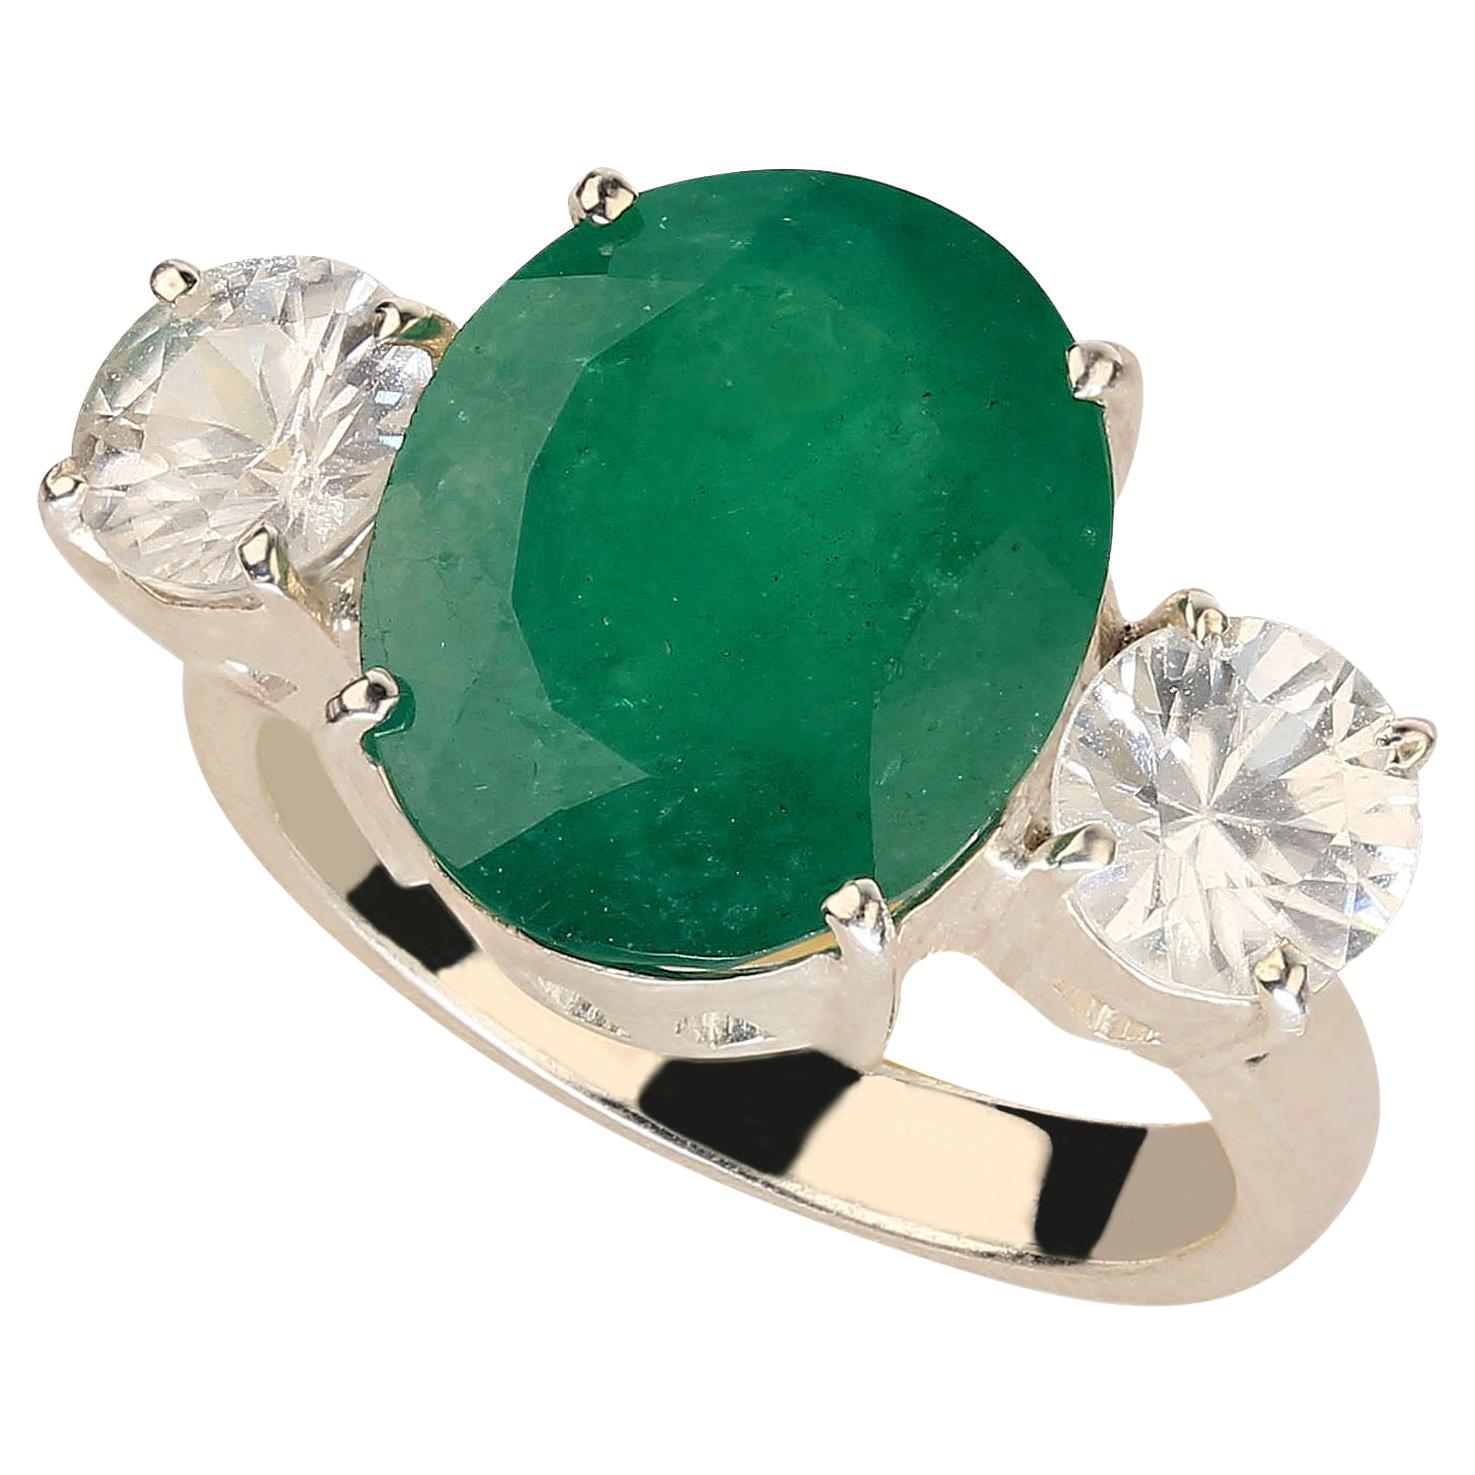 Big Emerald Cabochon Ring in 18K Gold Emerald Statement Ring Jewellery Rings Solitaire Rings Gift for Her 